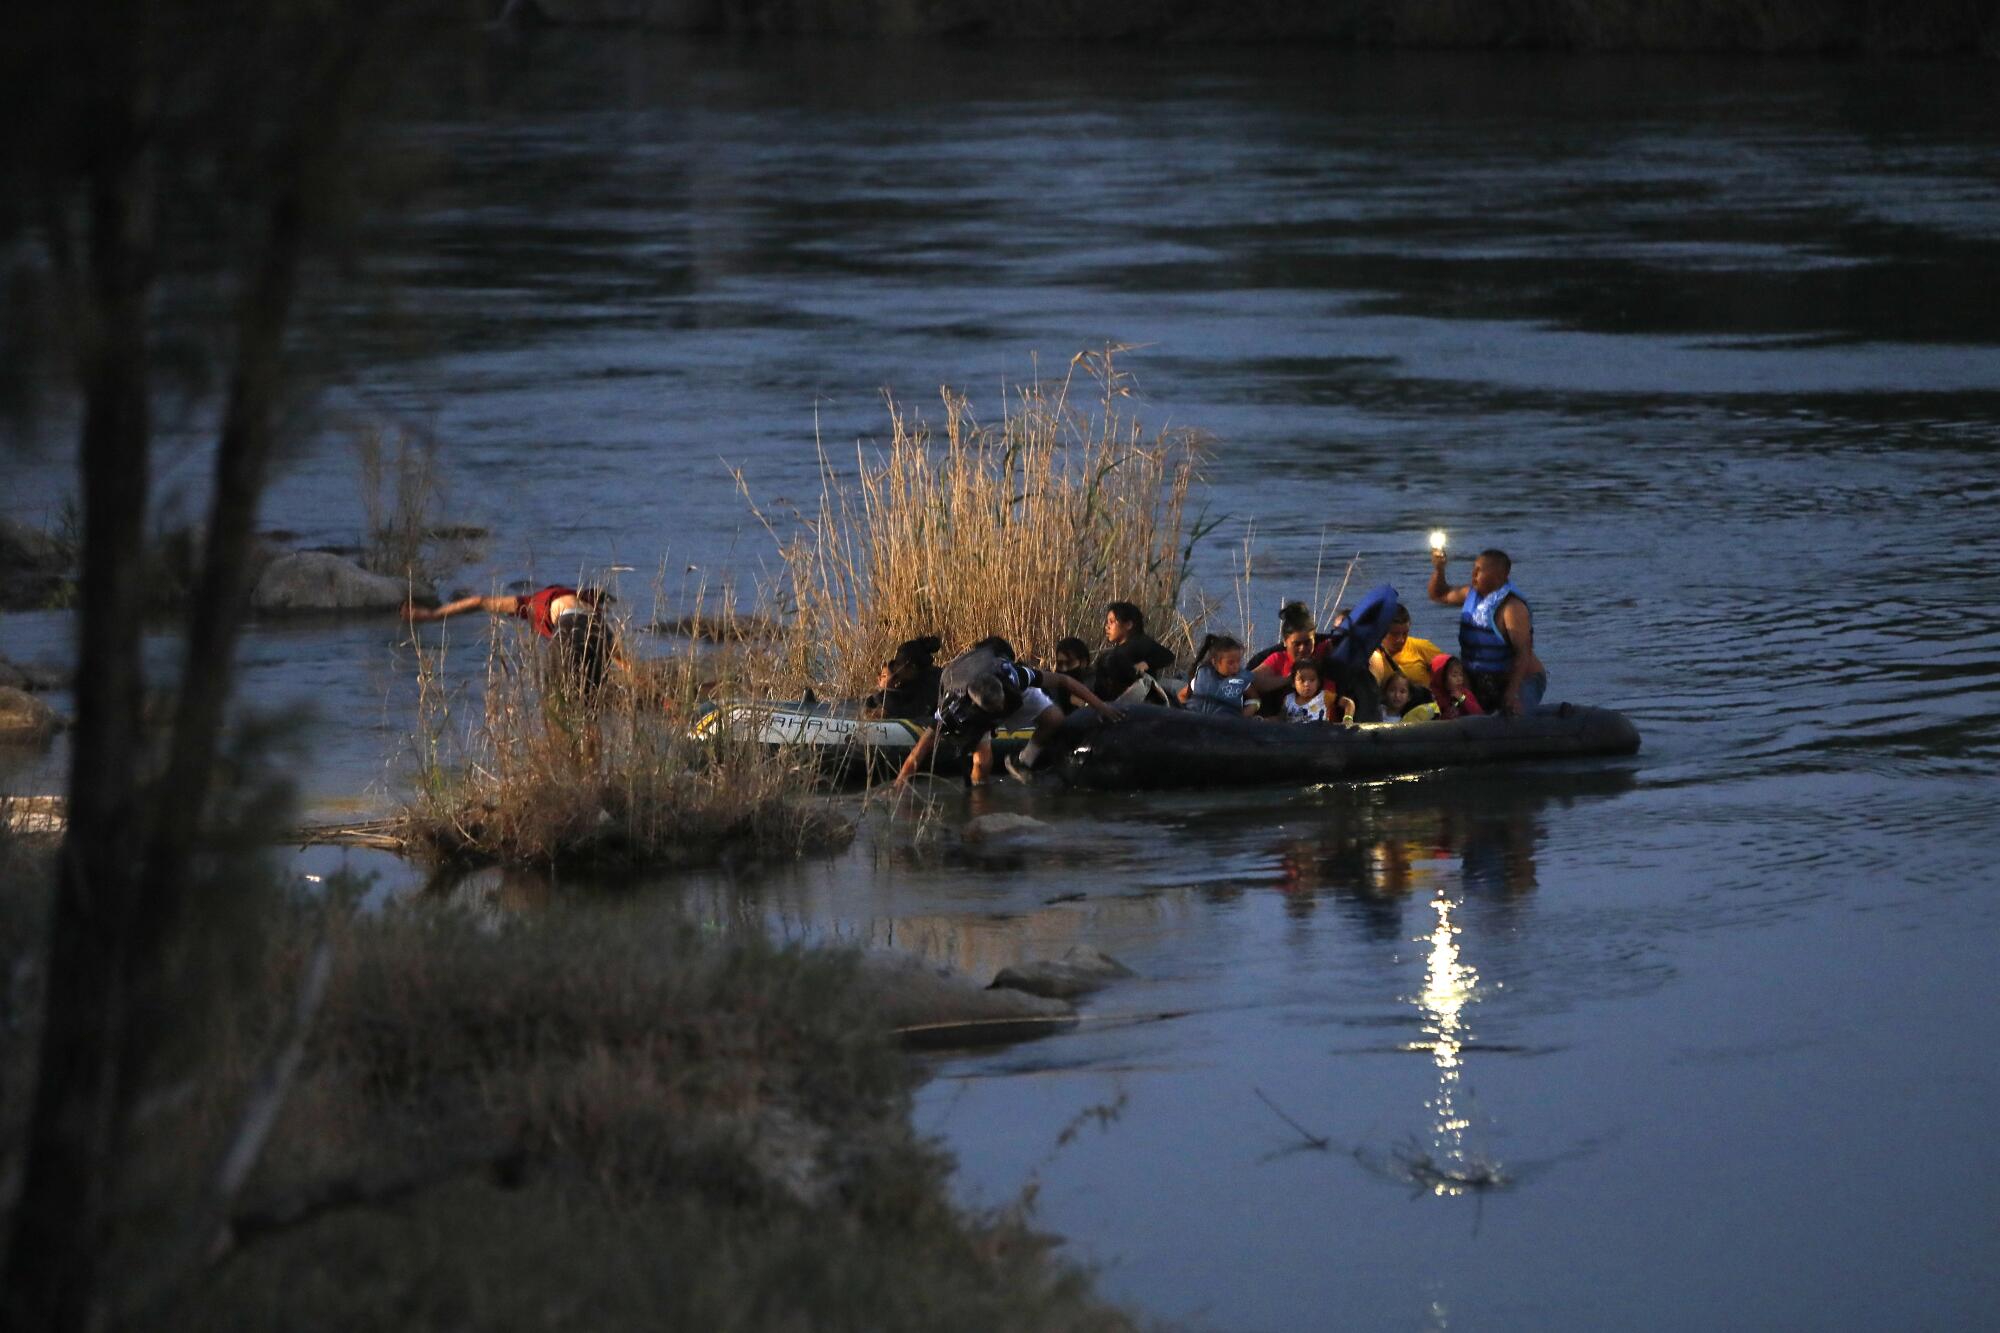 A group of people in inflatable rafts landing on a riverbank